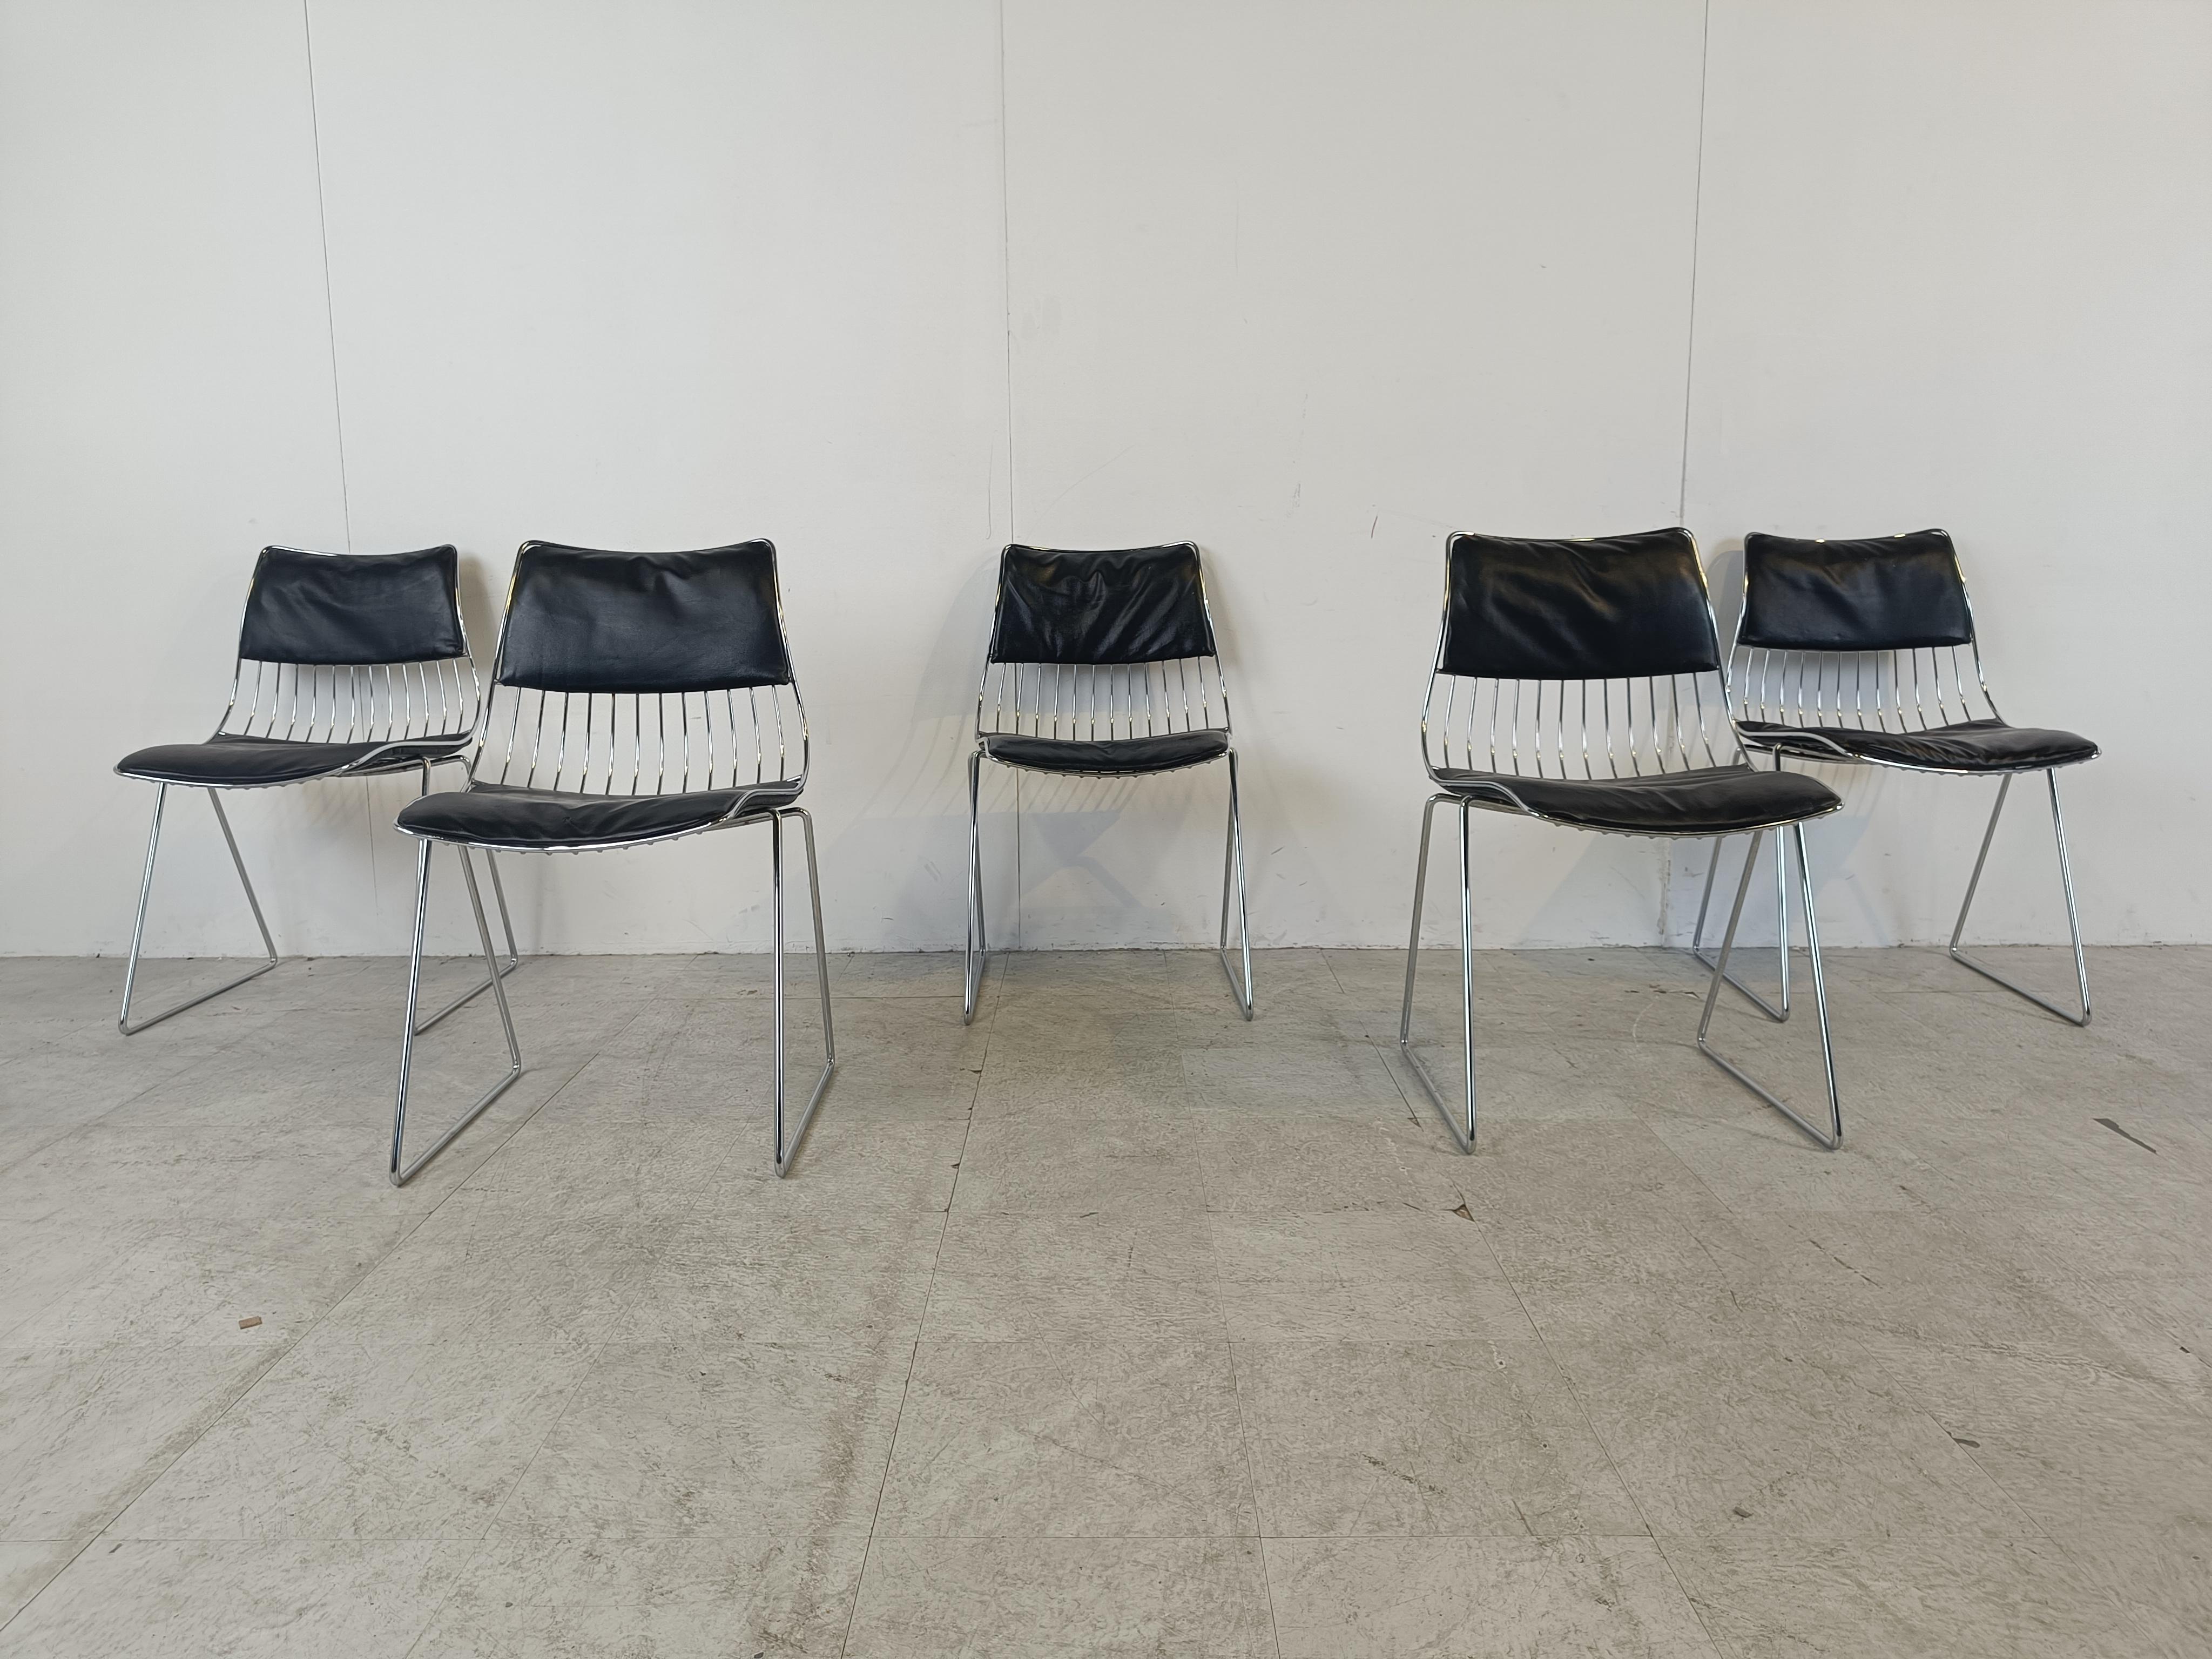 Late 20th Century Set of 5 dining chairs by Rudi Verelst for Novalux, 1970s